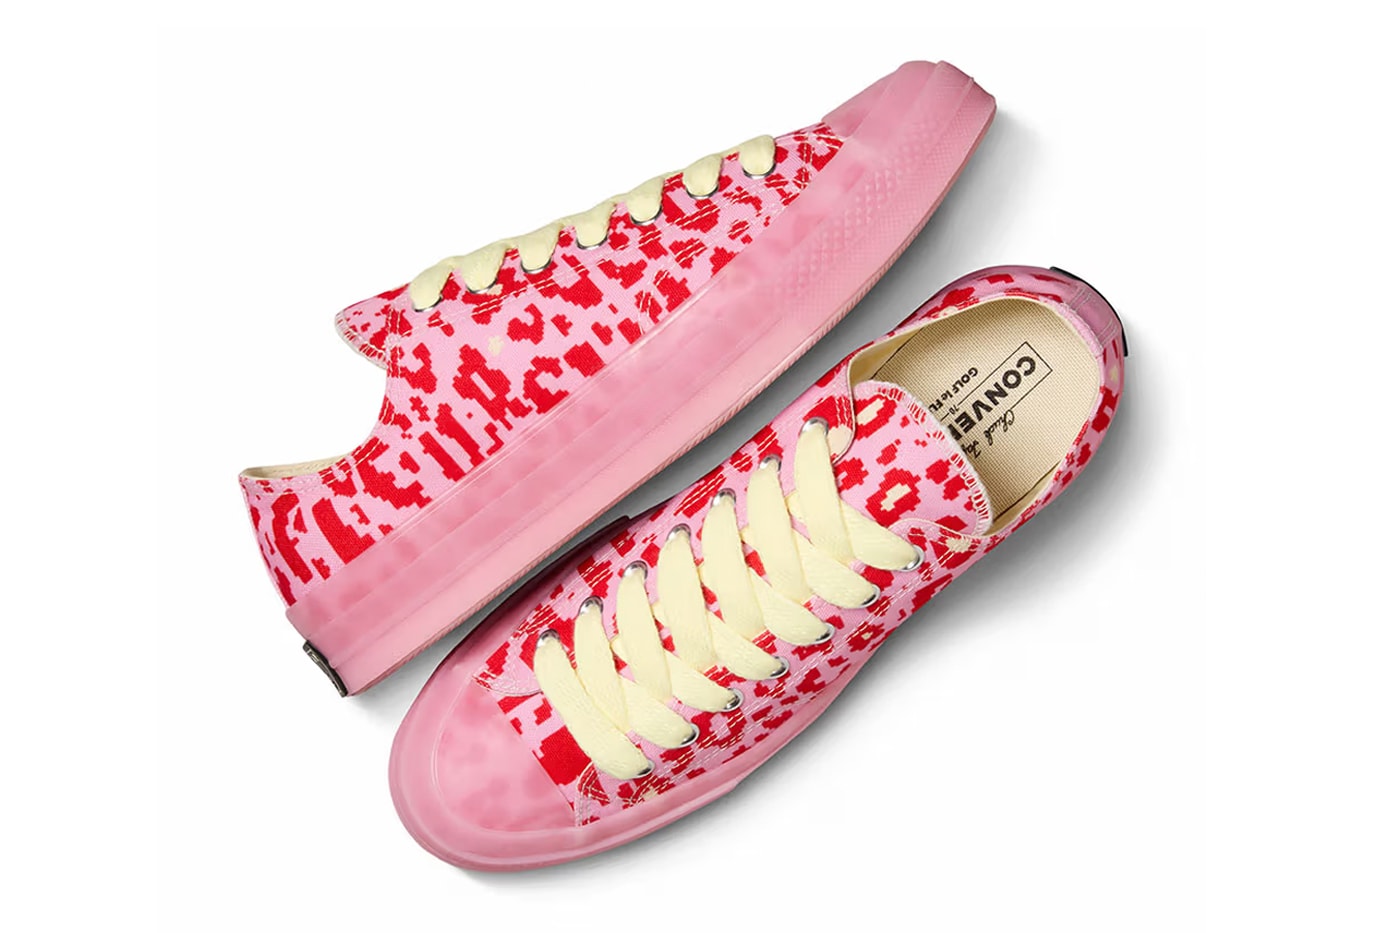 golf le fleur tyler the creator converse chuck 70 low digital leopard pink beige blue green release date info store list buying guide photos price 